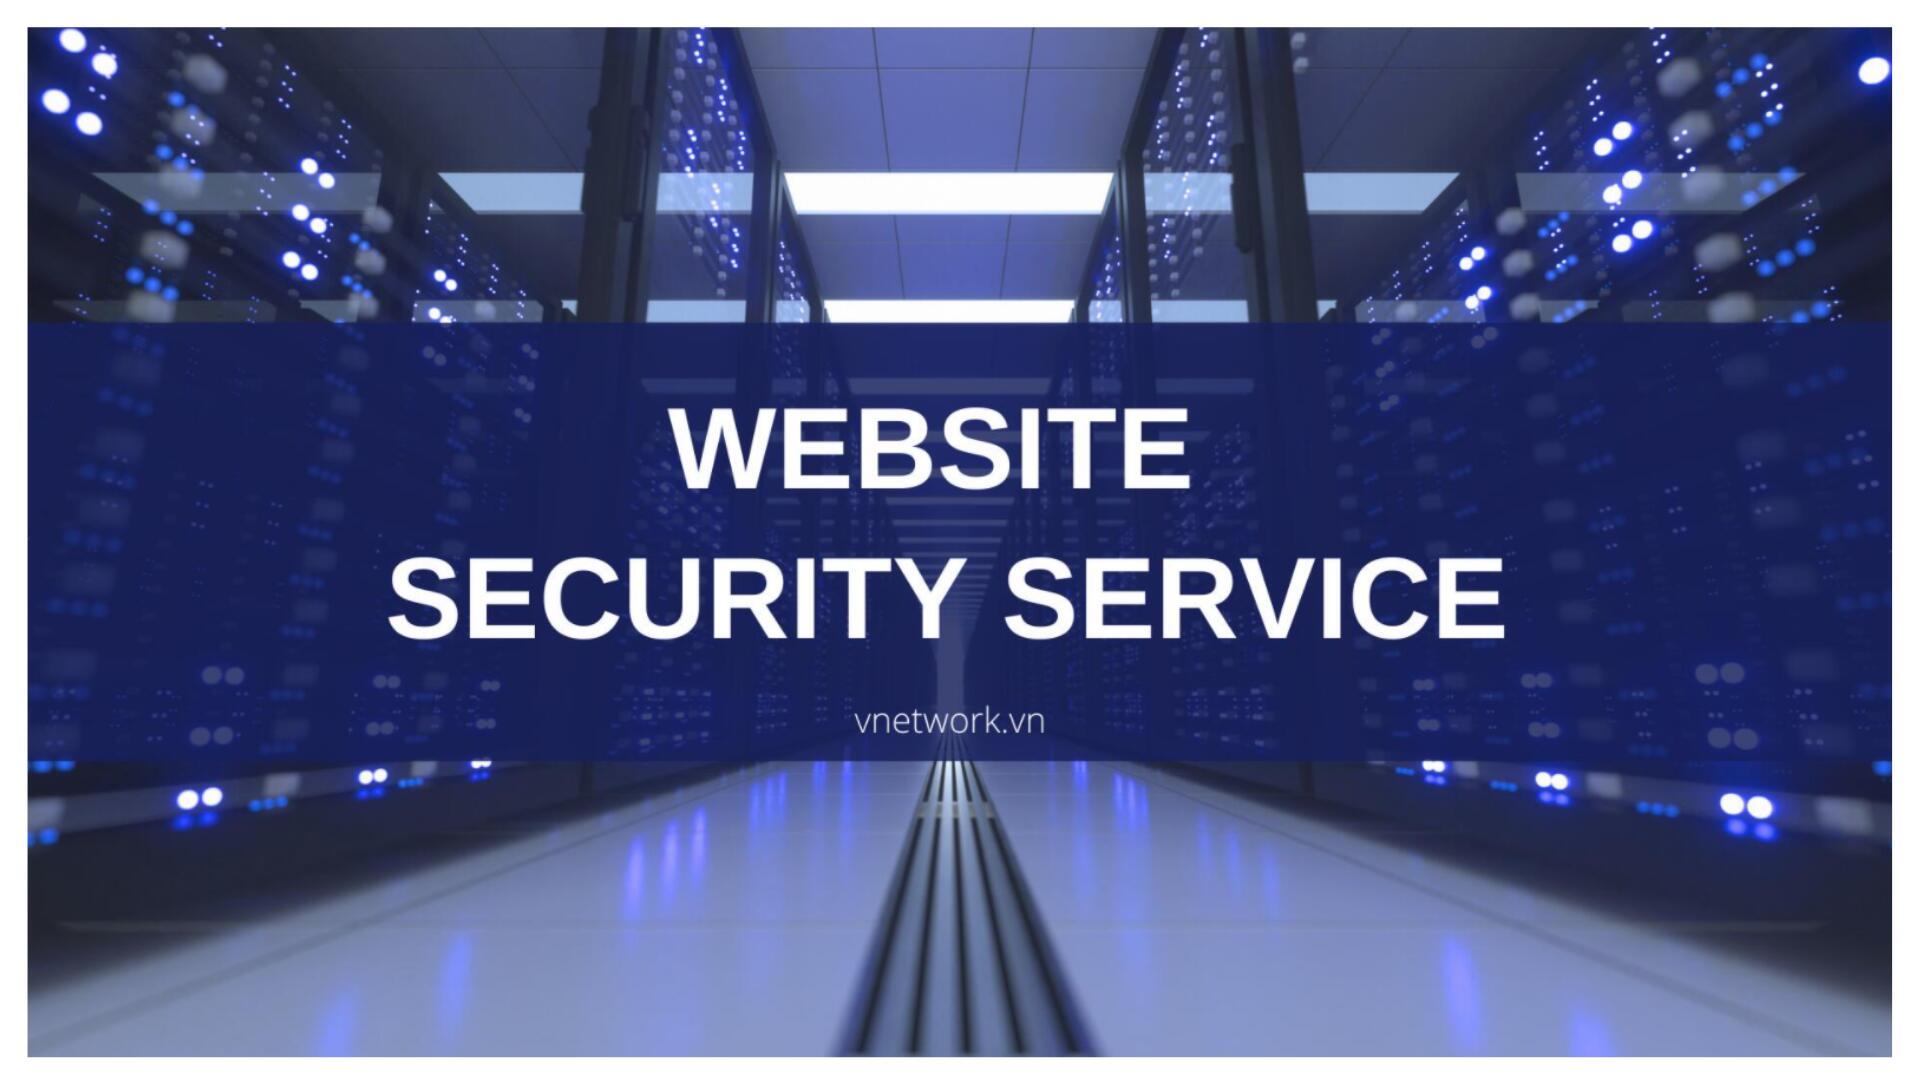 The key to choose website security services for businesses 